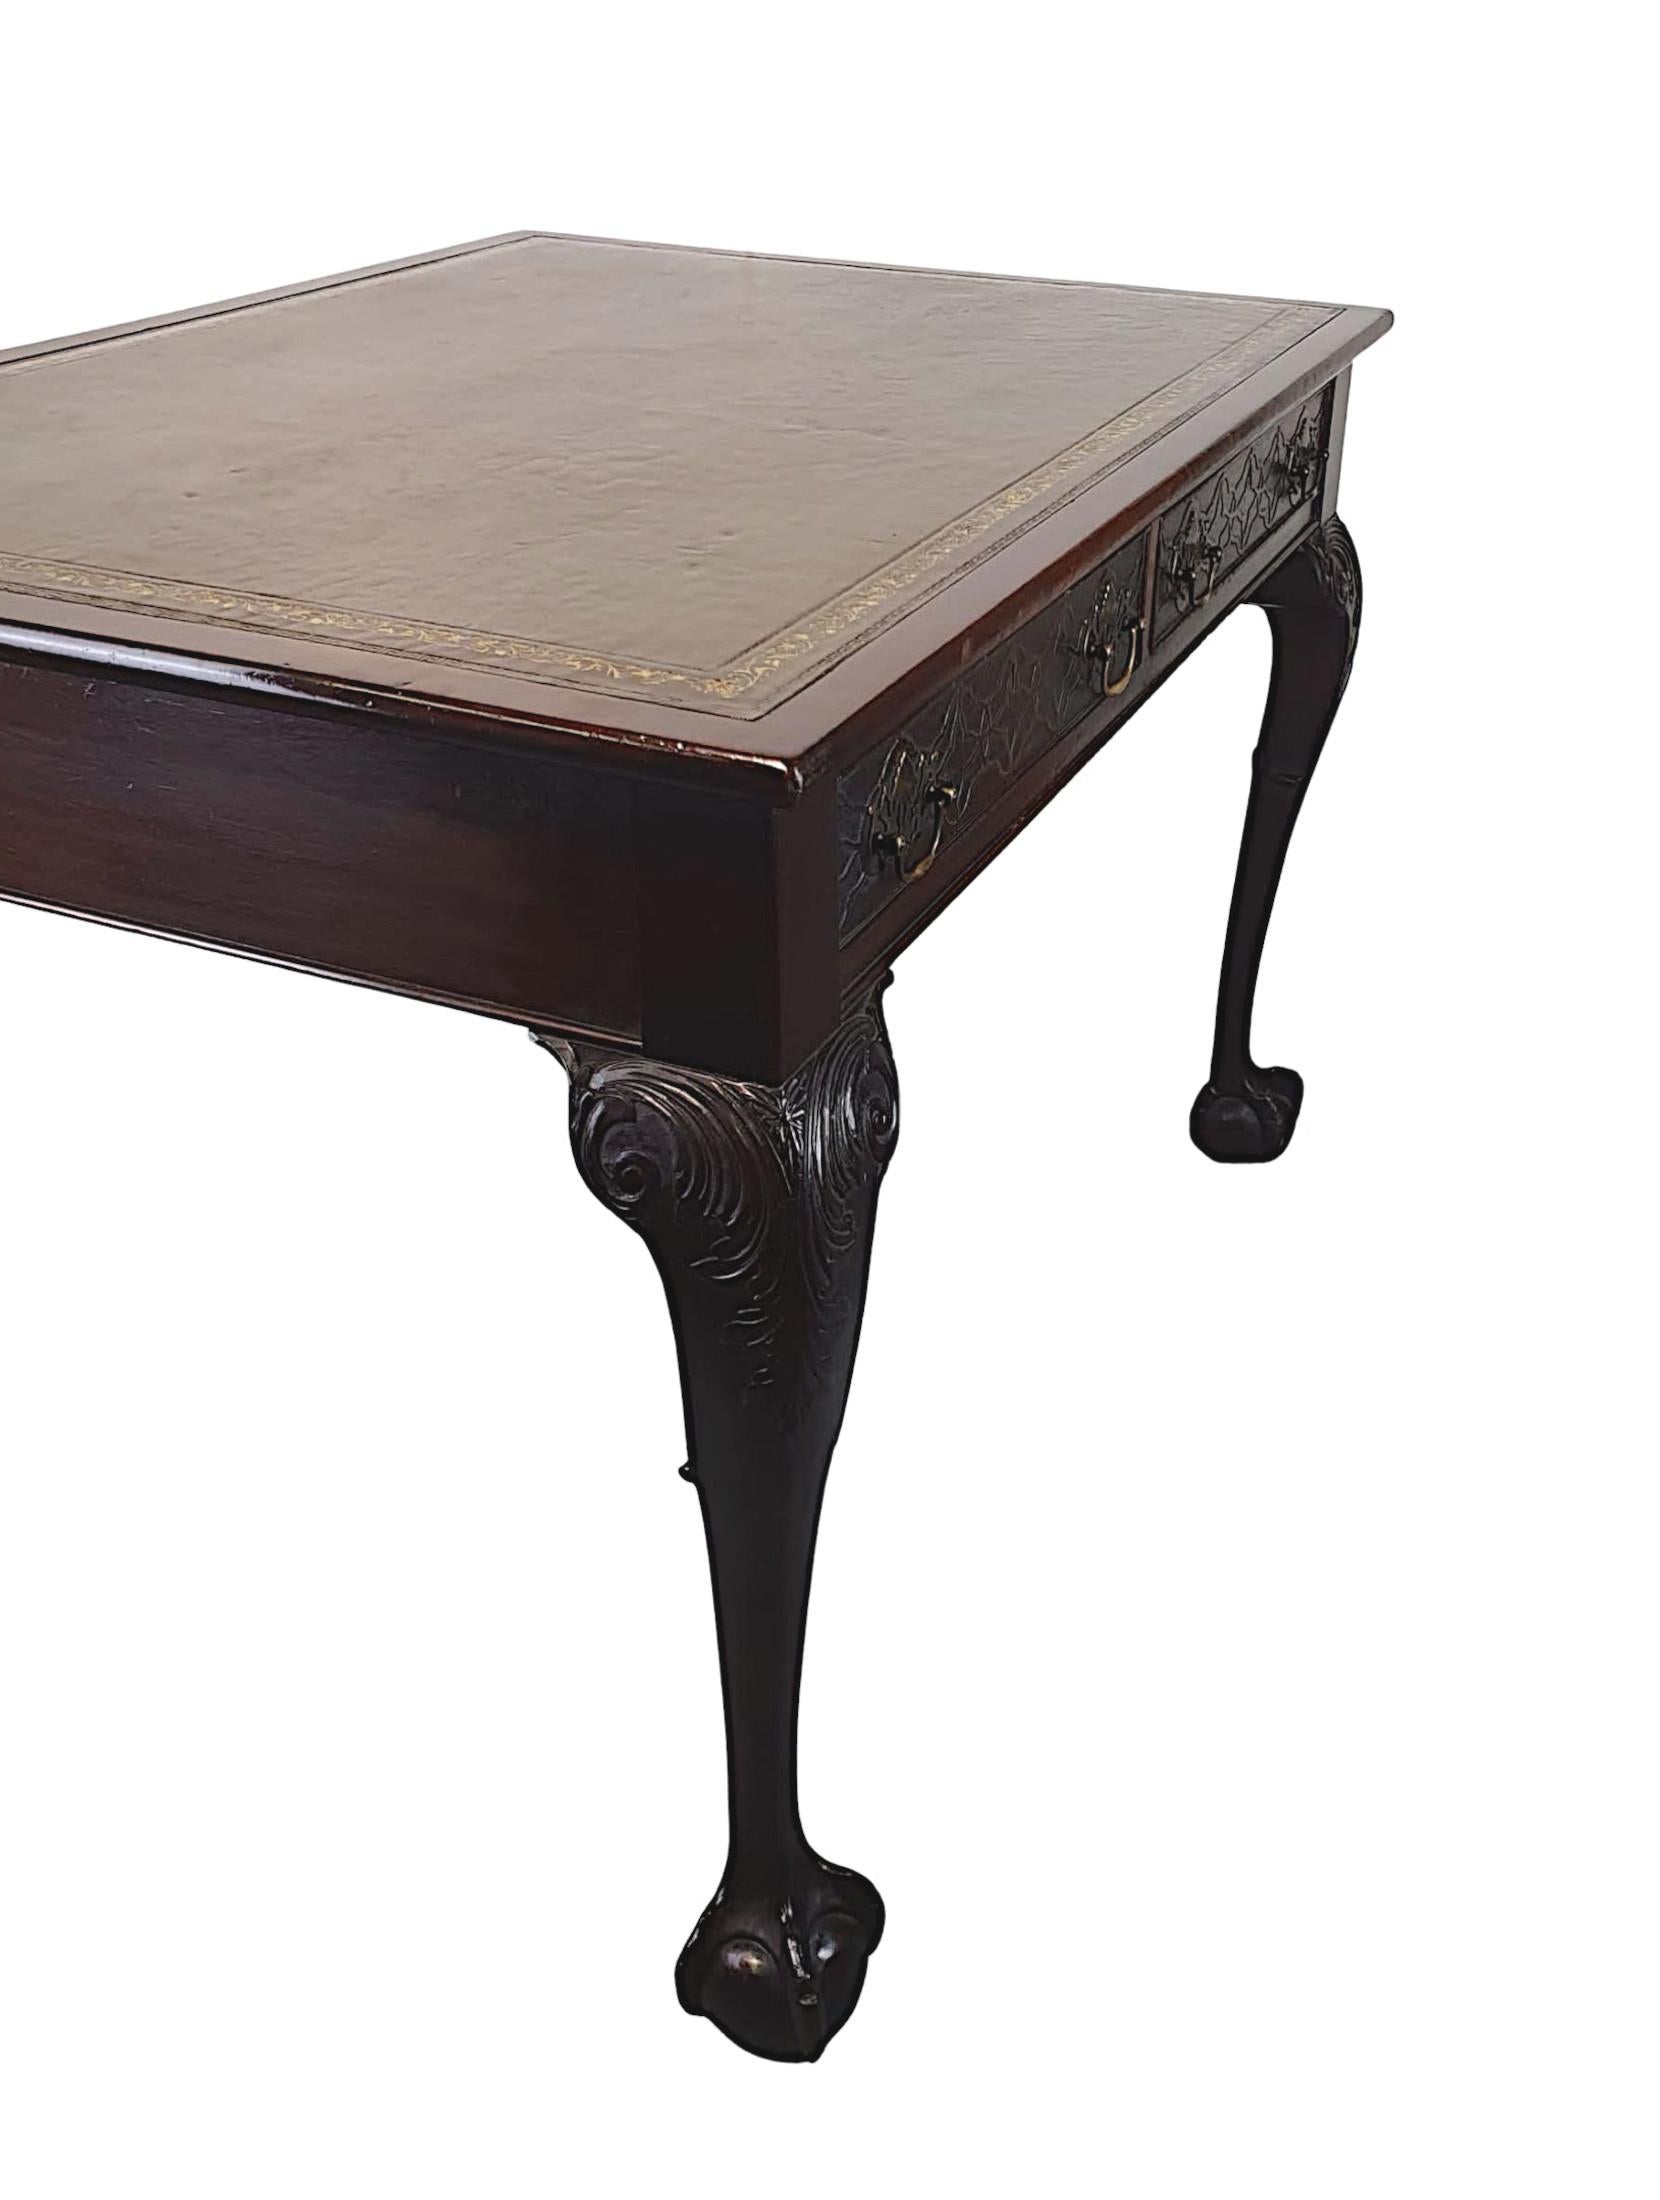 English Stunning Late 19th Century Desk in the Thomas Chippendale Manner For Sale